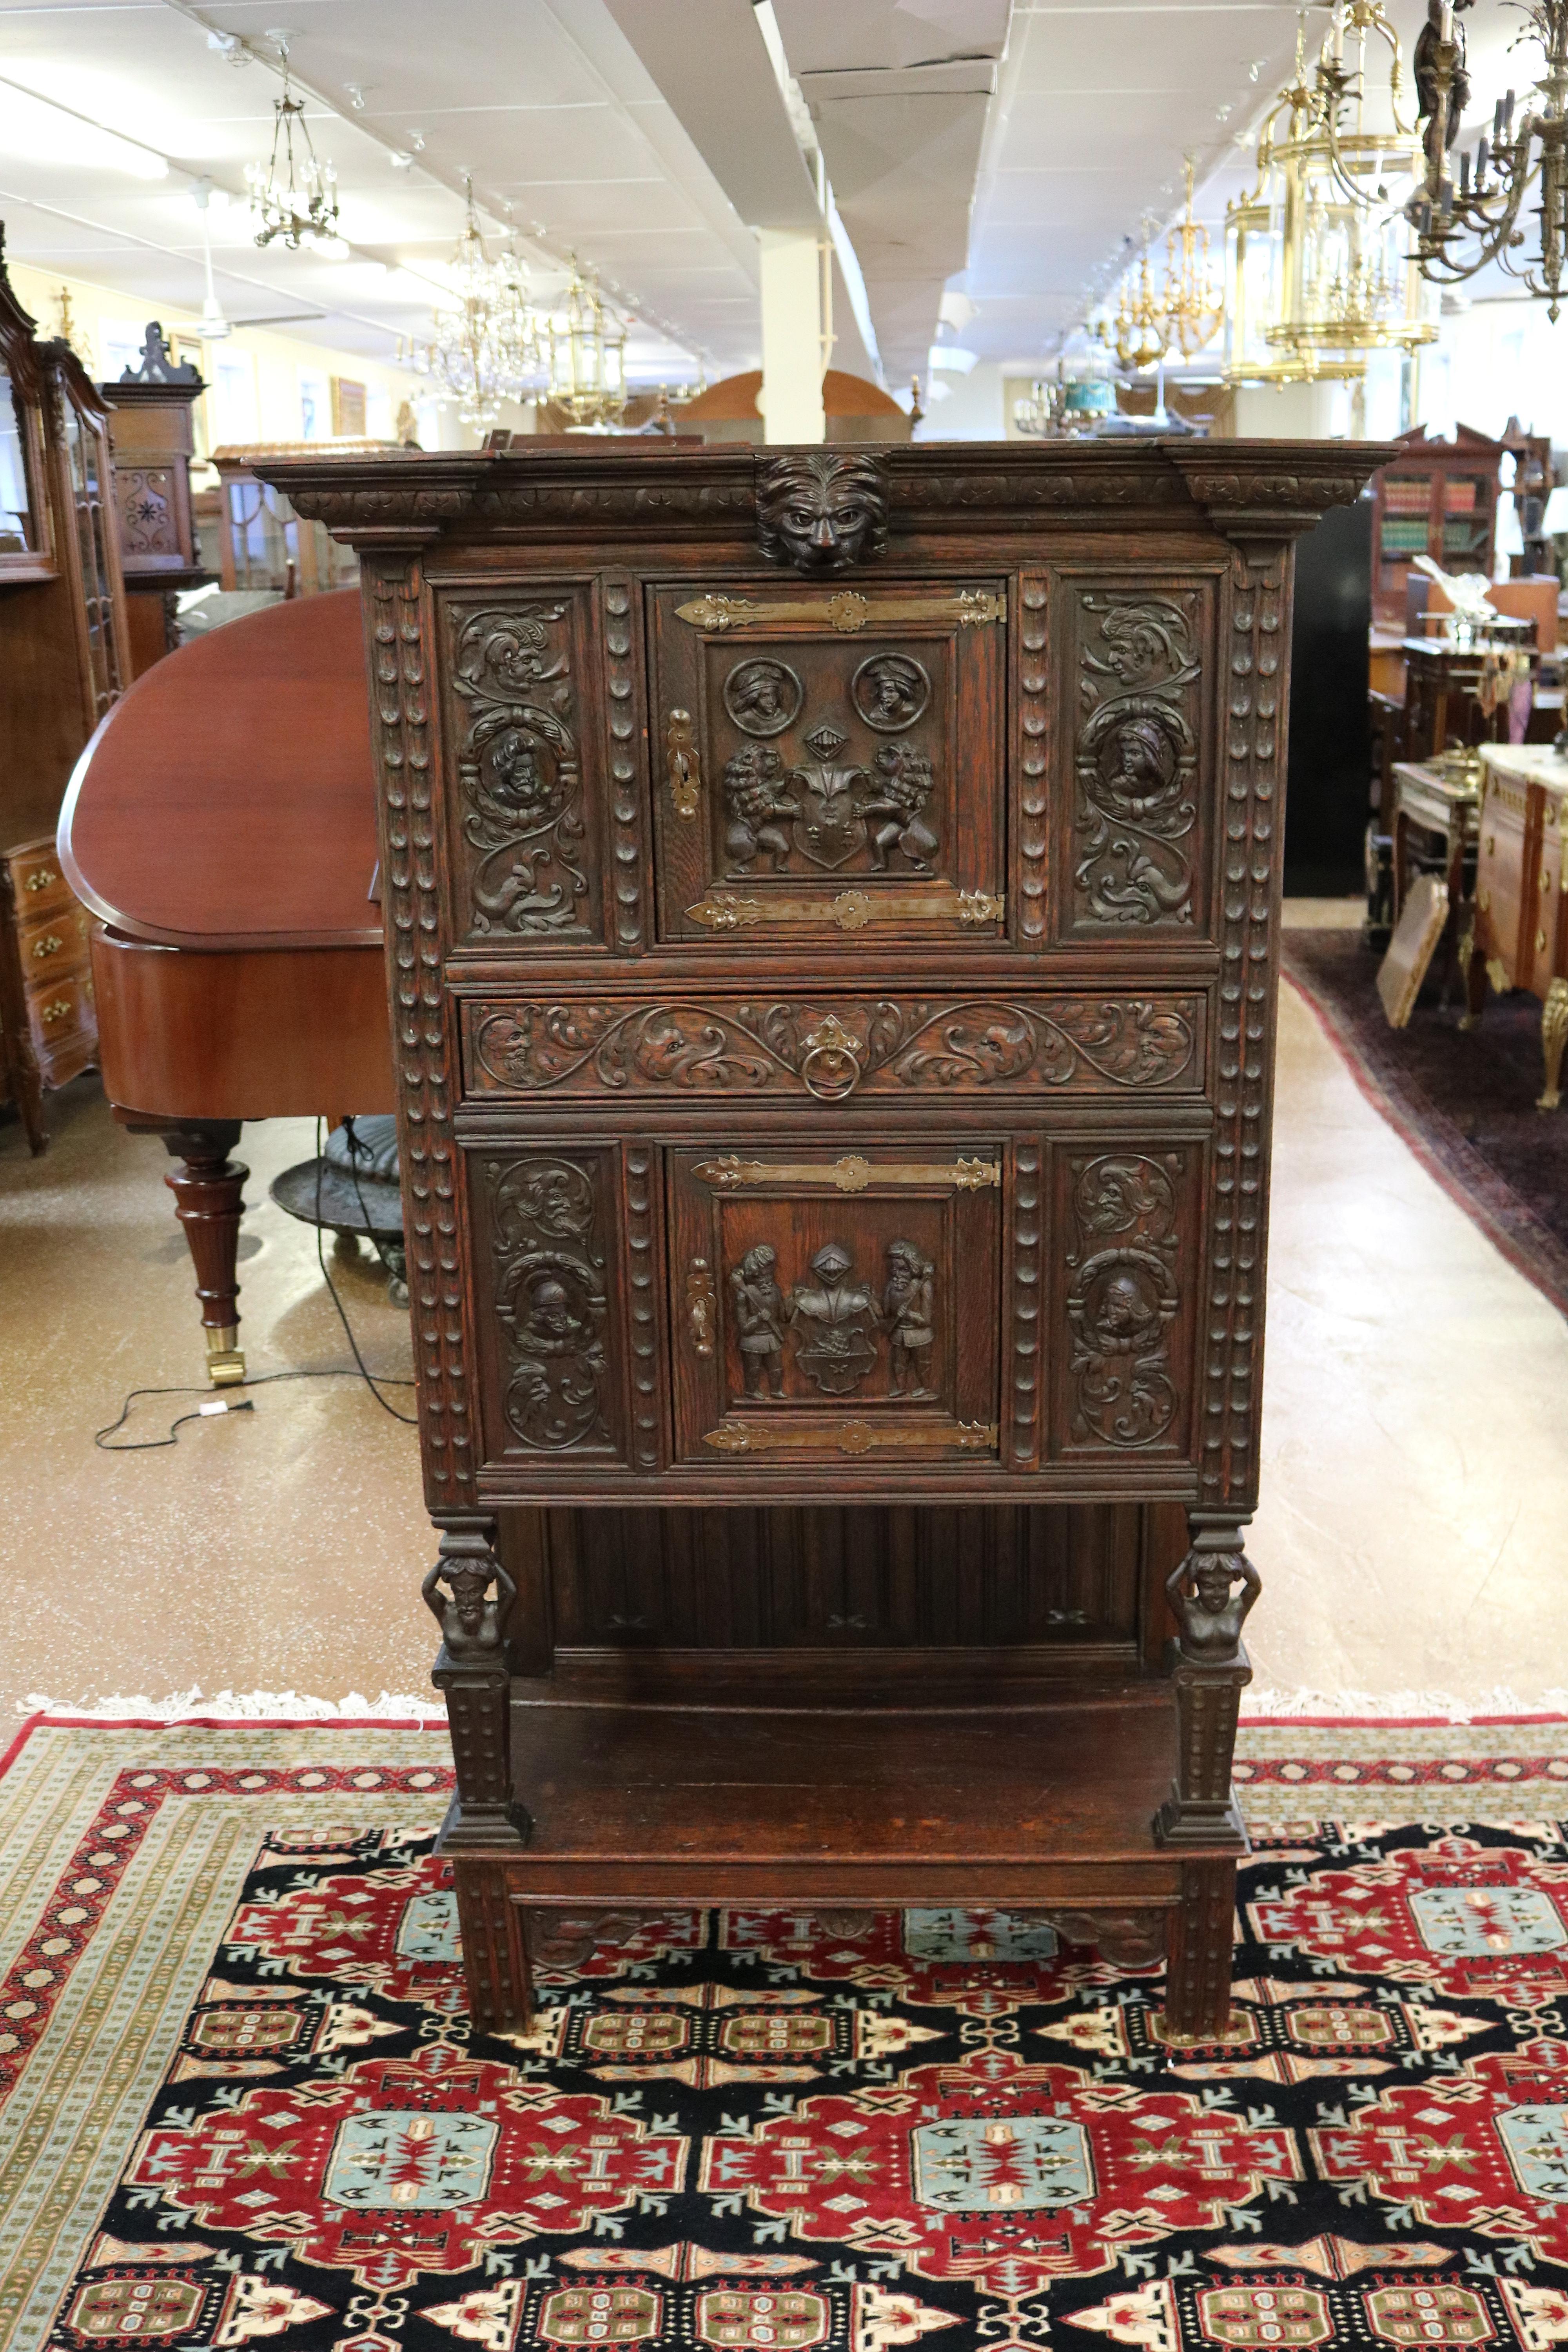 French Provincial 19th Century Oak French Brittany Cupboard Cabinet For Sale